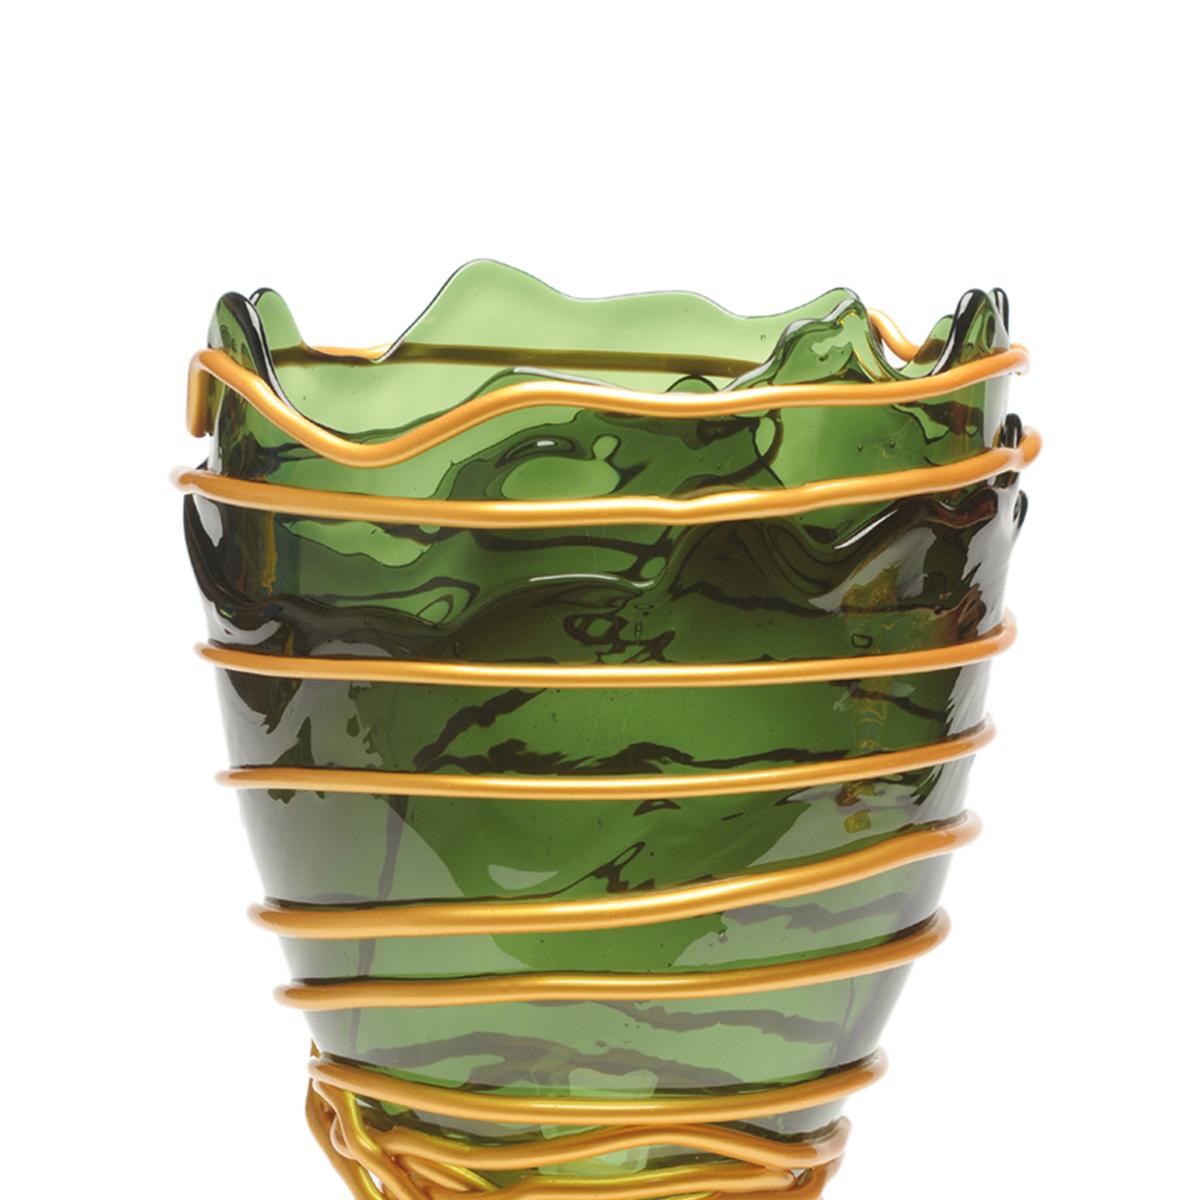 Pompitu II vase, green and gold.

Vase in soft resin designed by Gaetano Pesce in 1995 for Fish Design collection.

Measures: L - ø 22cm x H 36cm

Other sizes available

Colours: green and gold.
Vase in soft resin designed by Gaetano Pesce